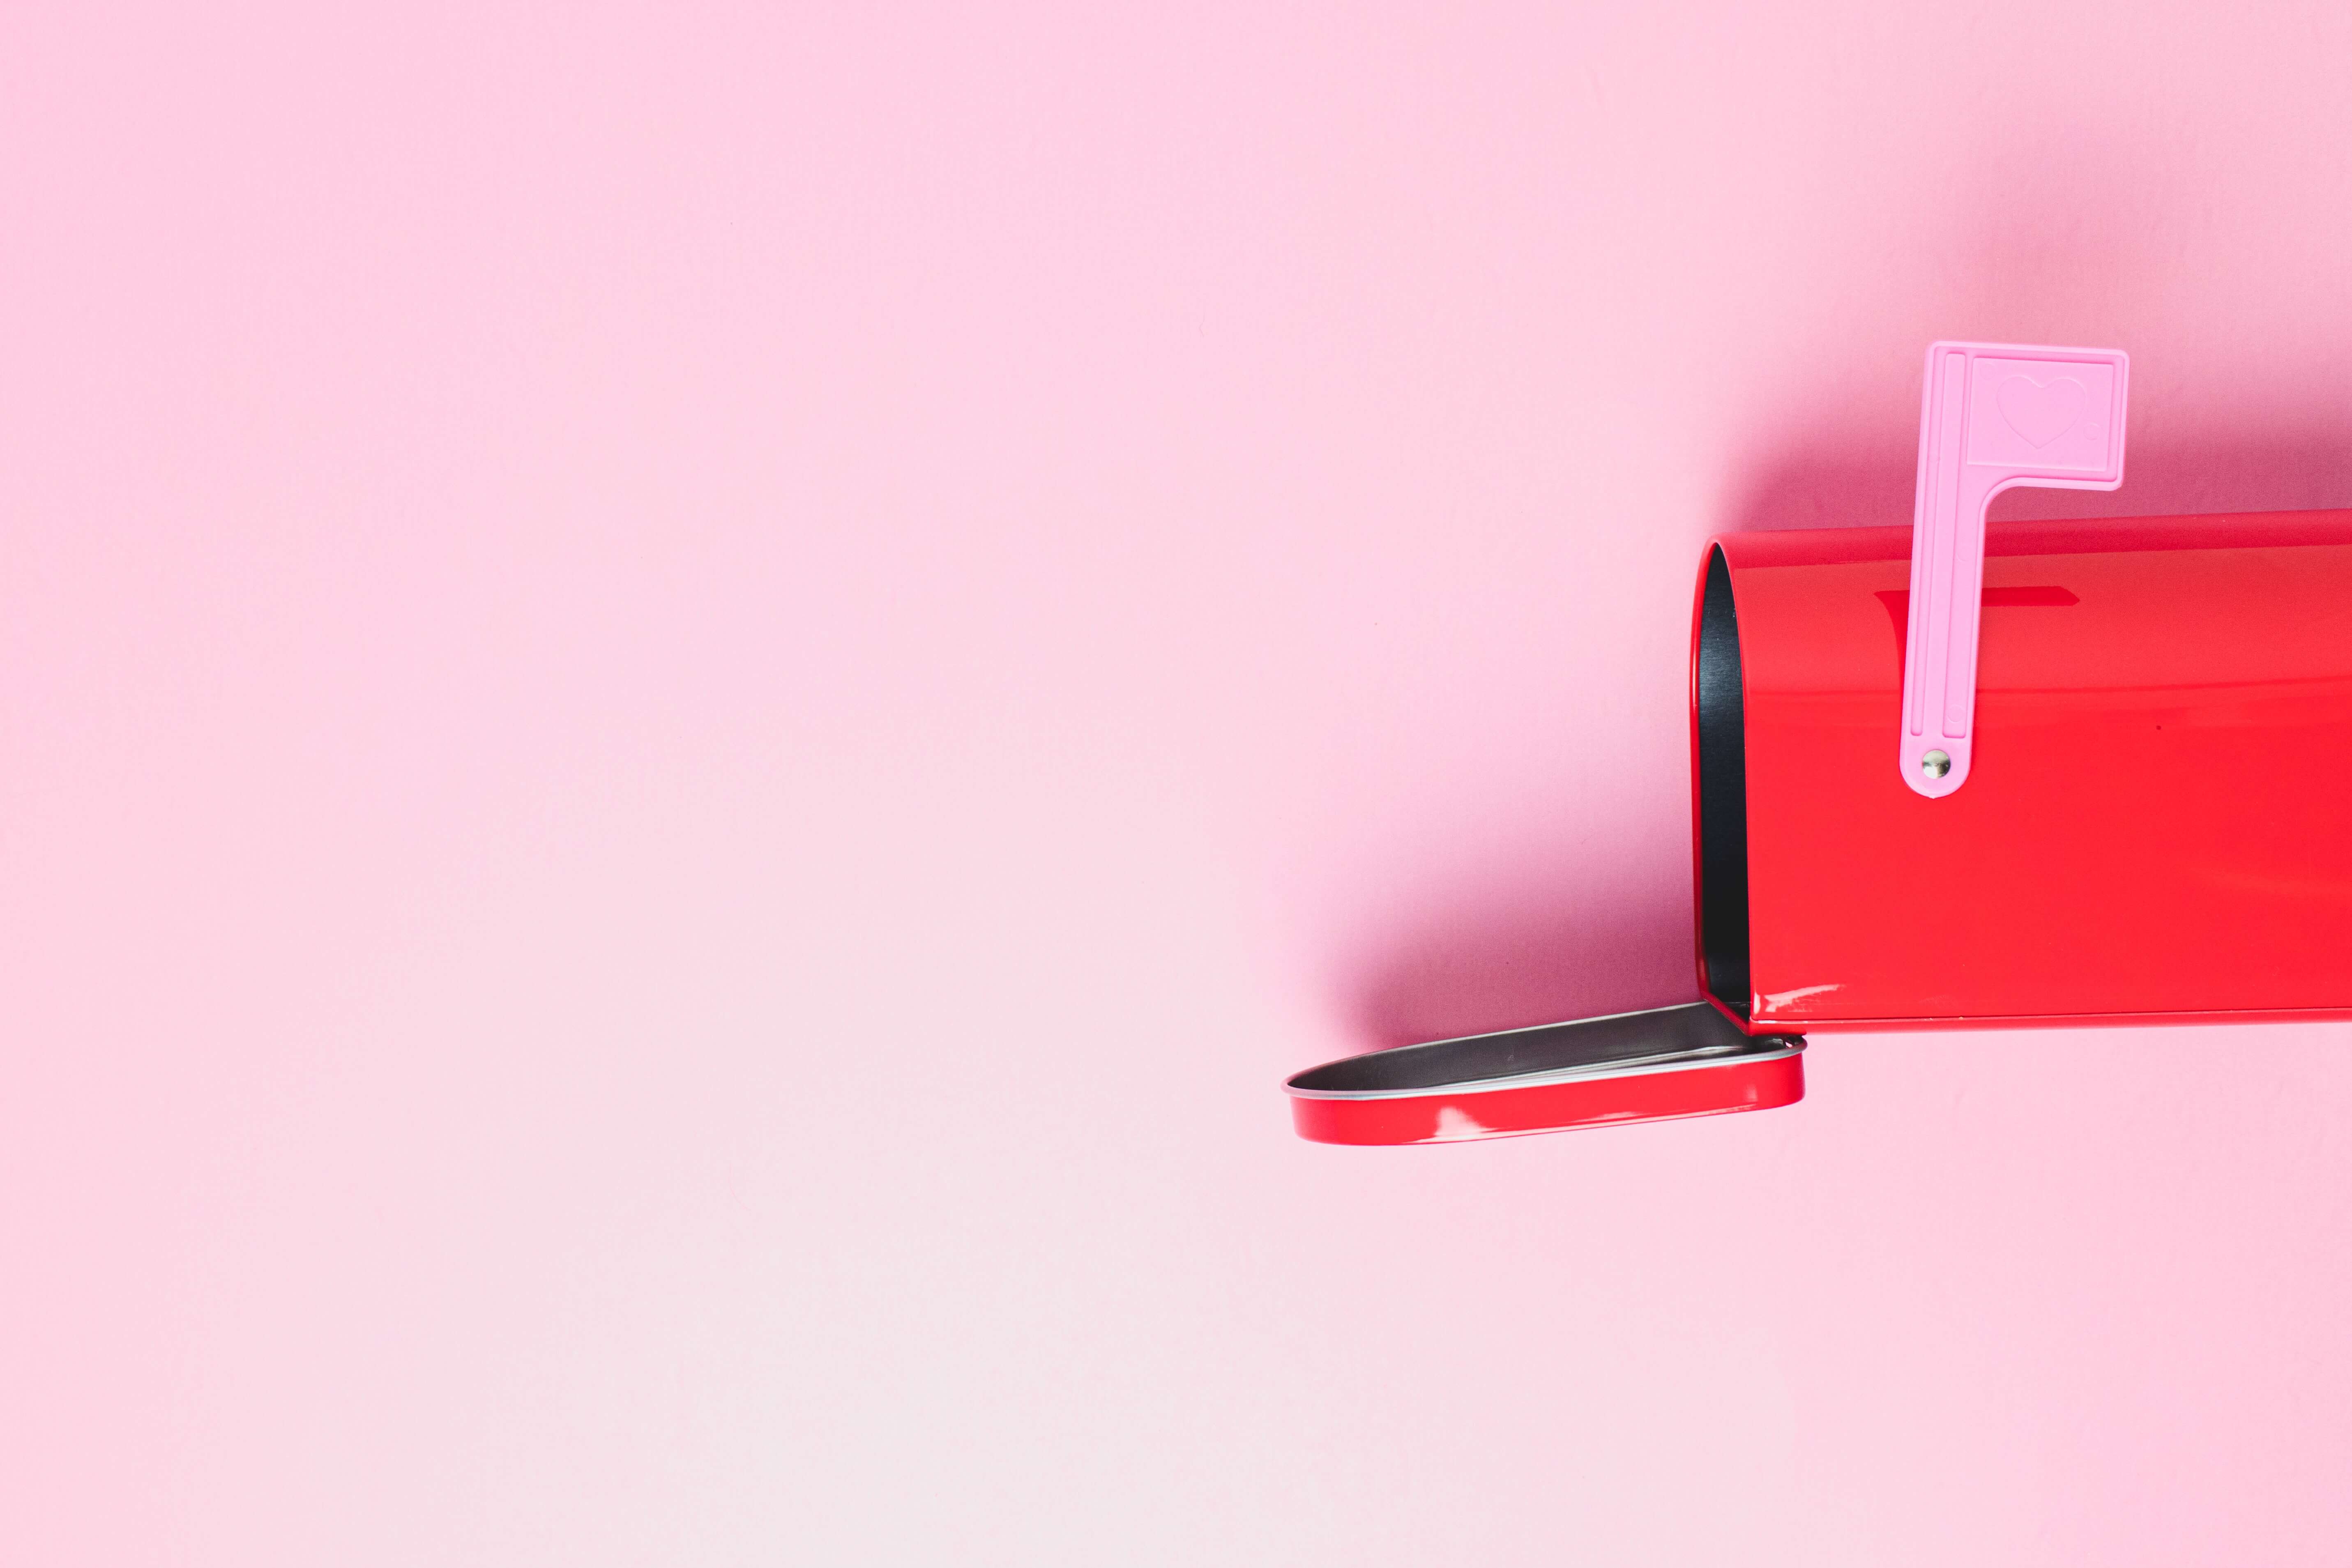 A red mailbox turned to the side and opened against a pink background